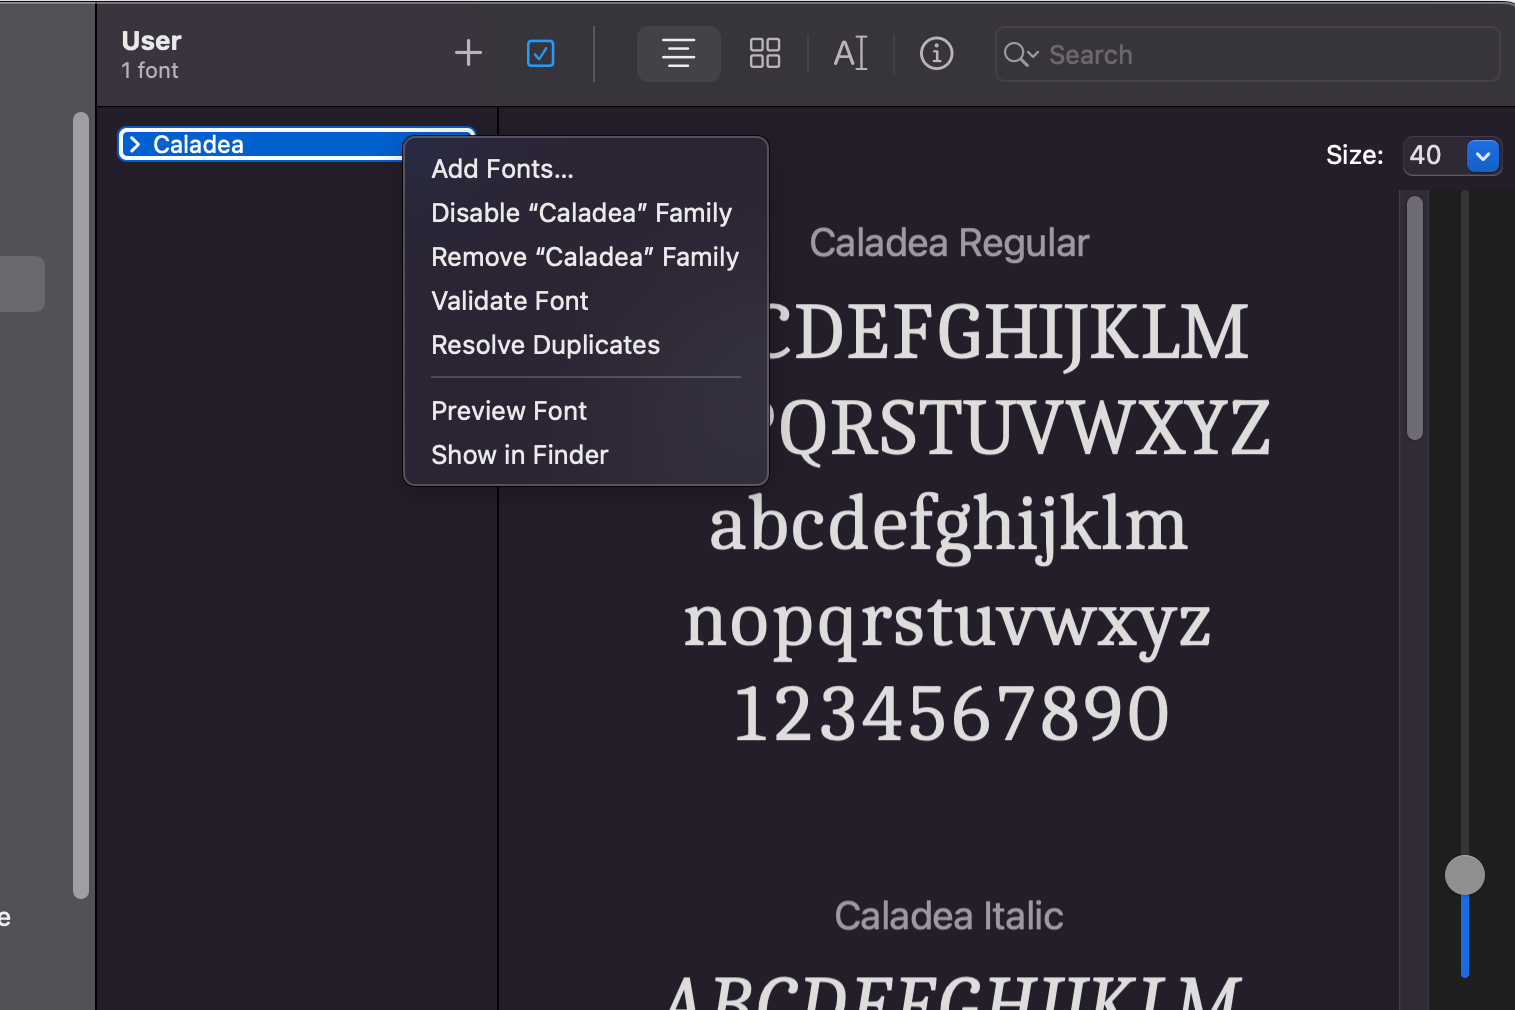 Validate Font in macOS.